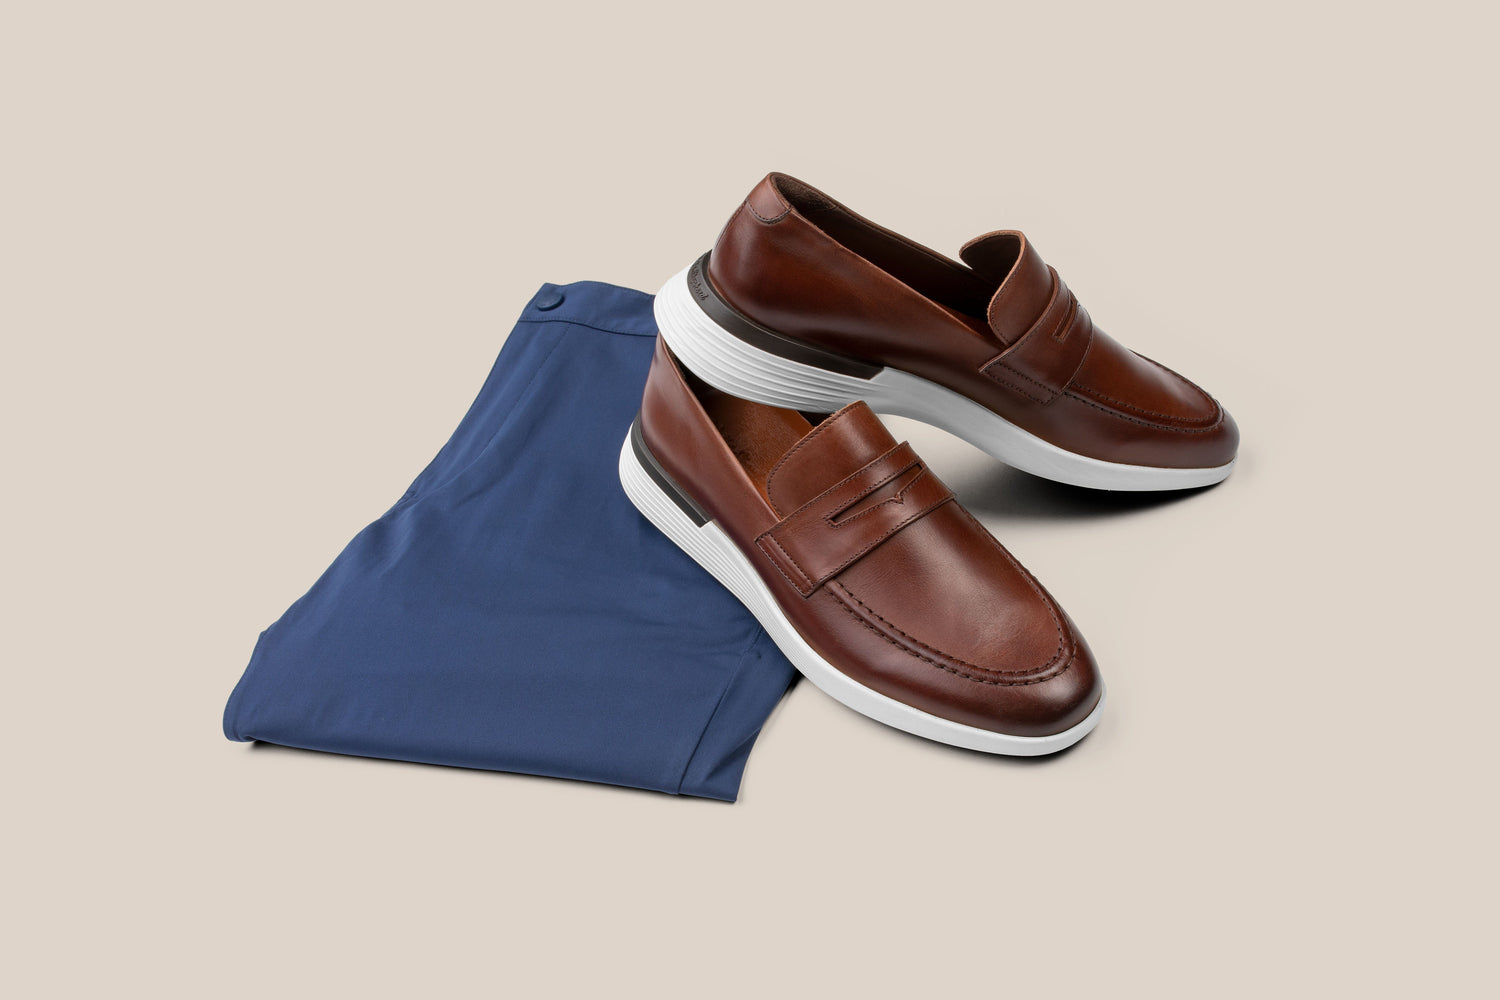 Style Guide - The Crossover Loafer